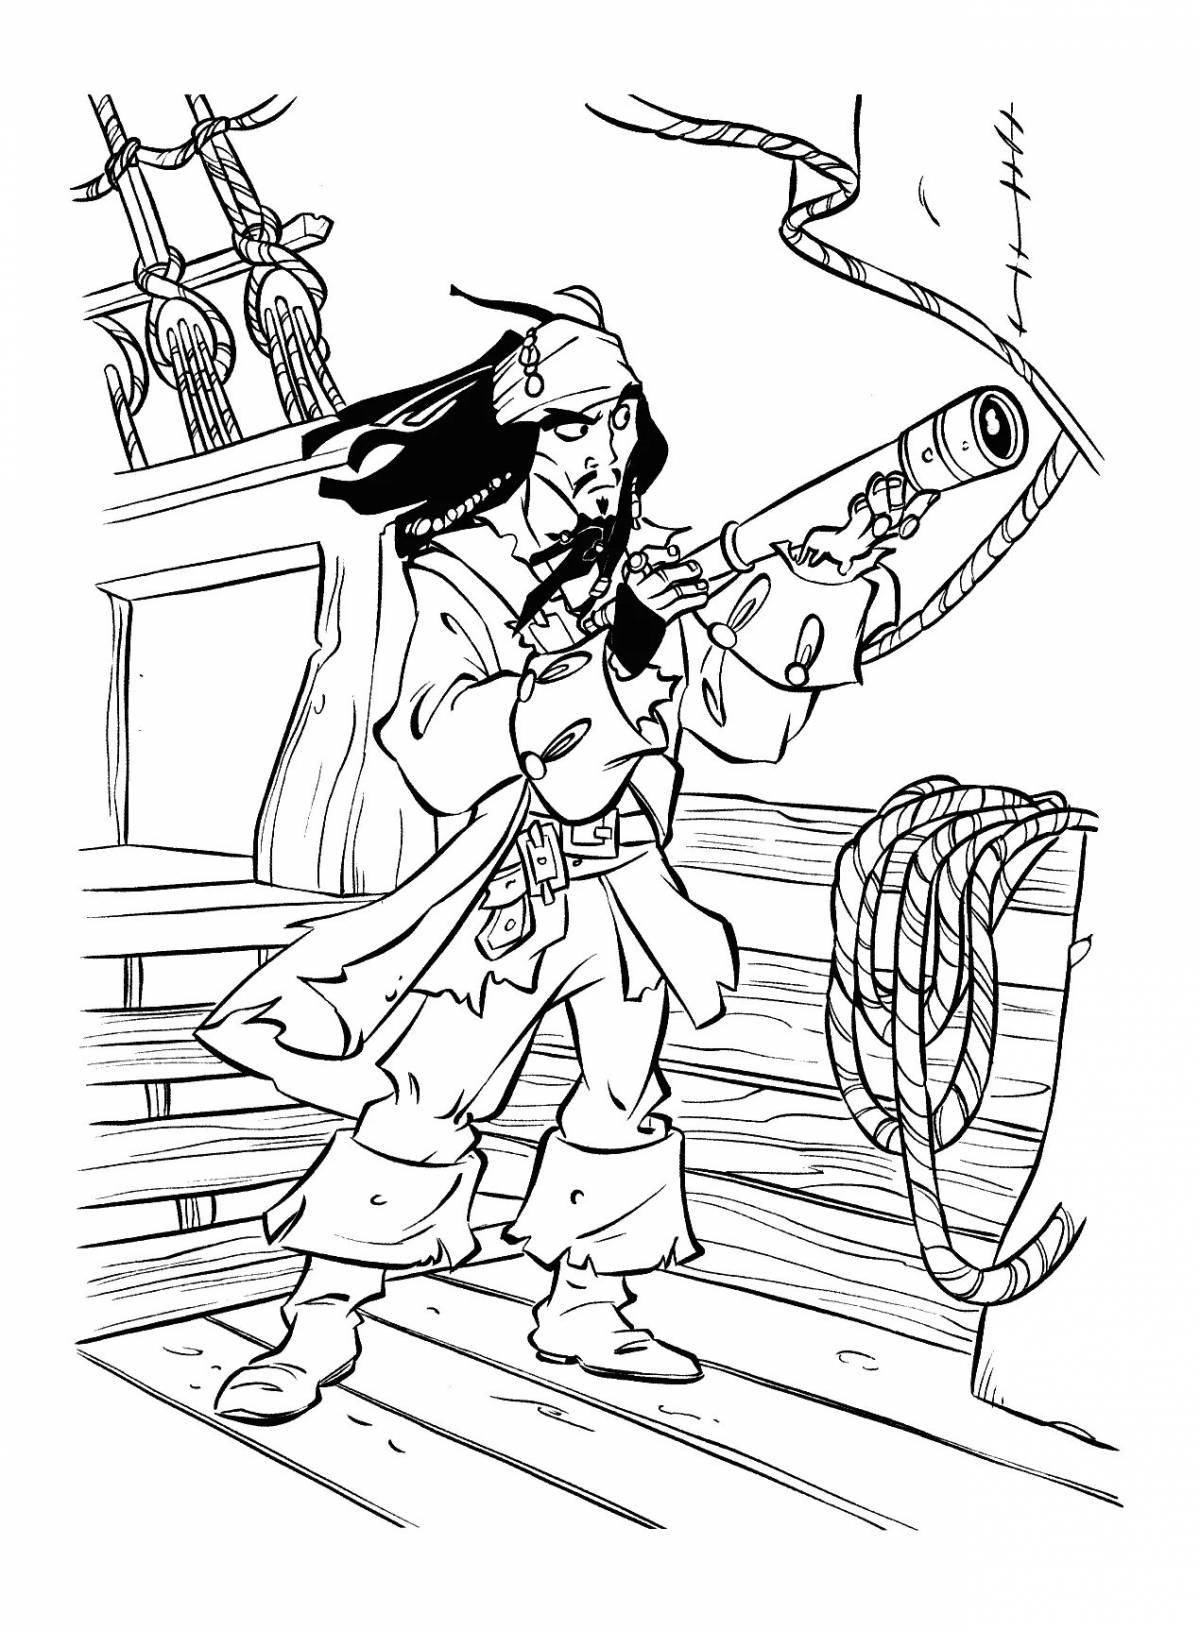 Coloring book cheeky jack sparrow